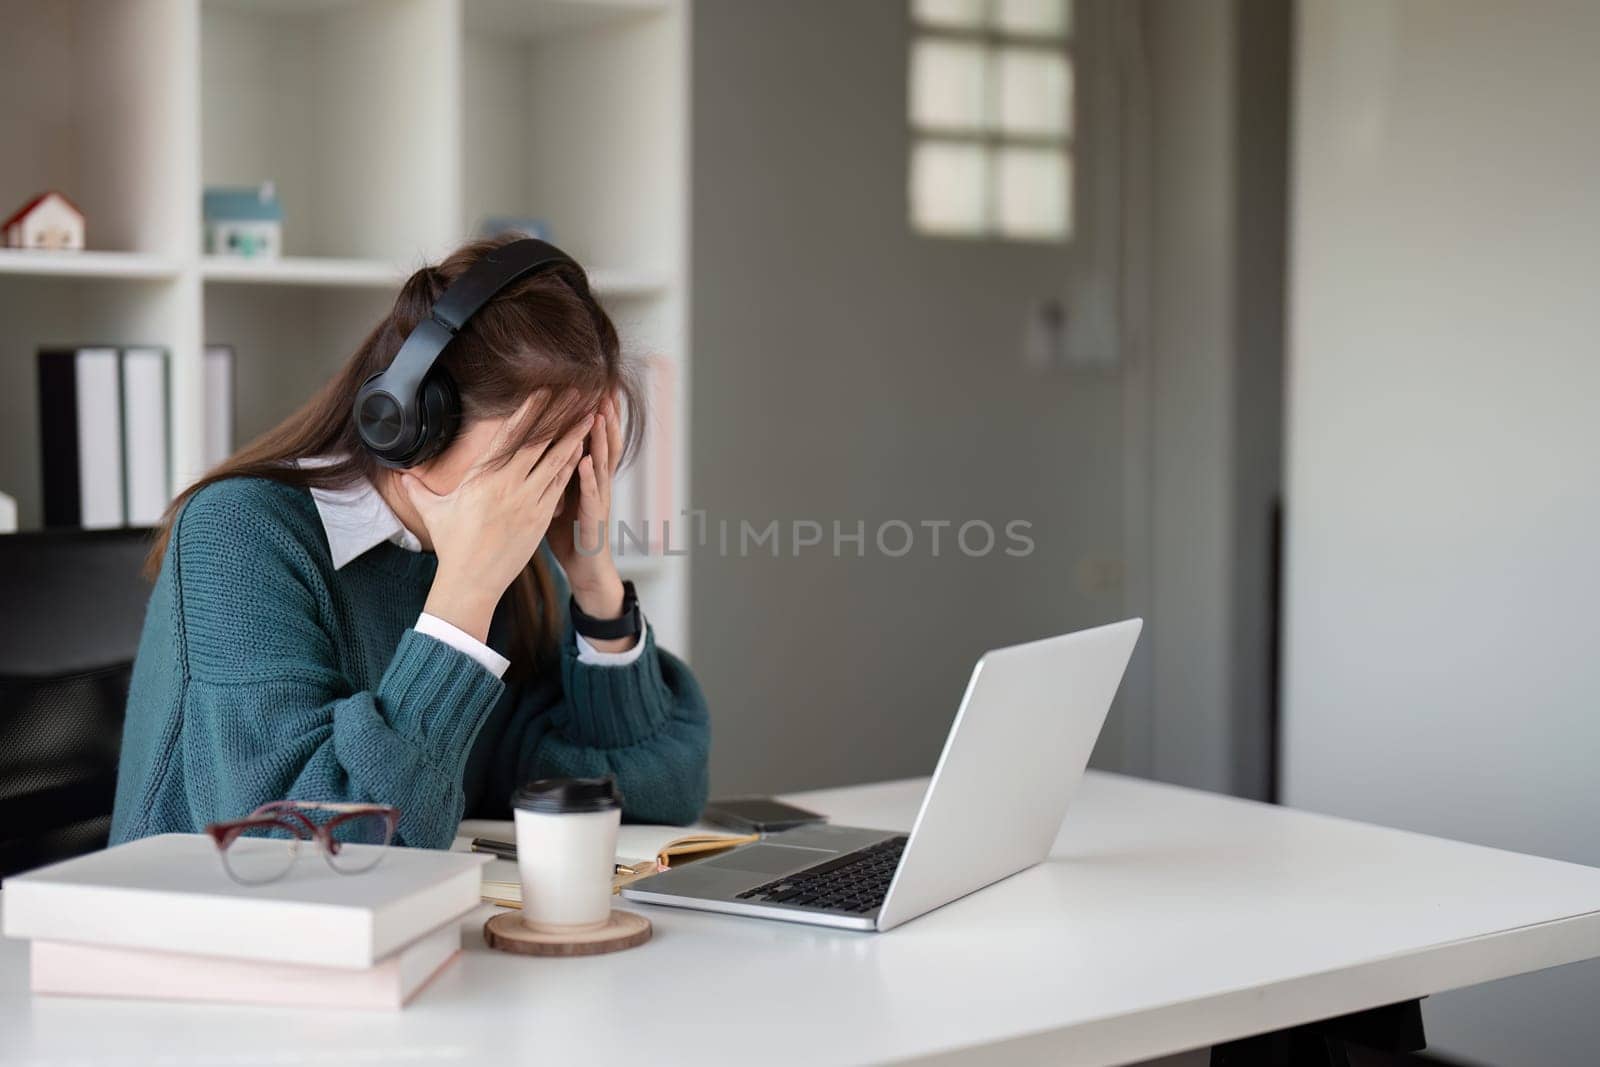 Young woman feeling stressed while wearing headphones and using a laptop in a home office.